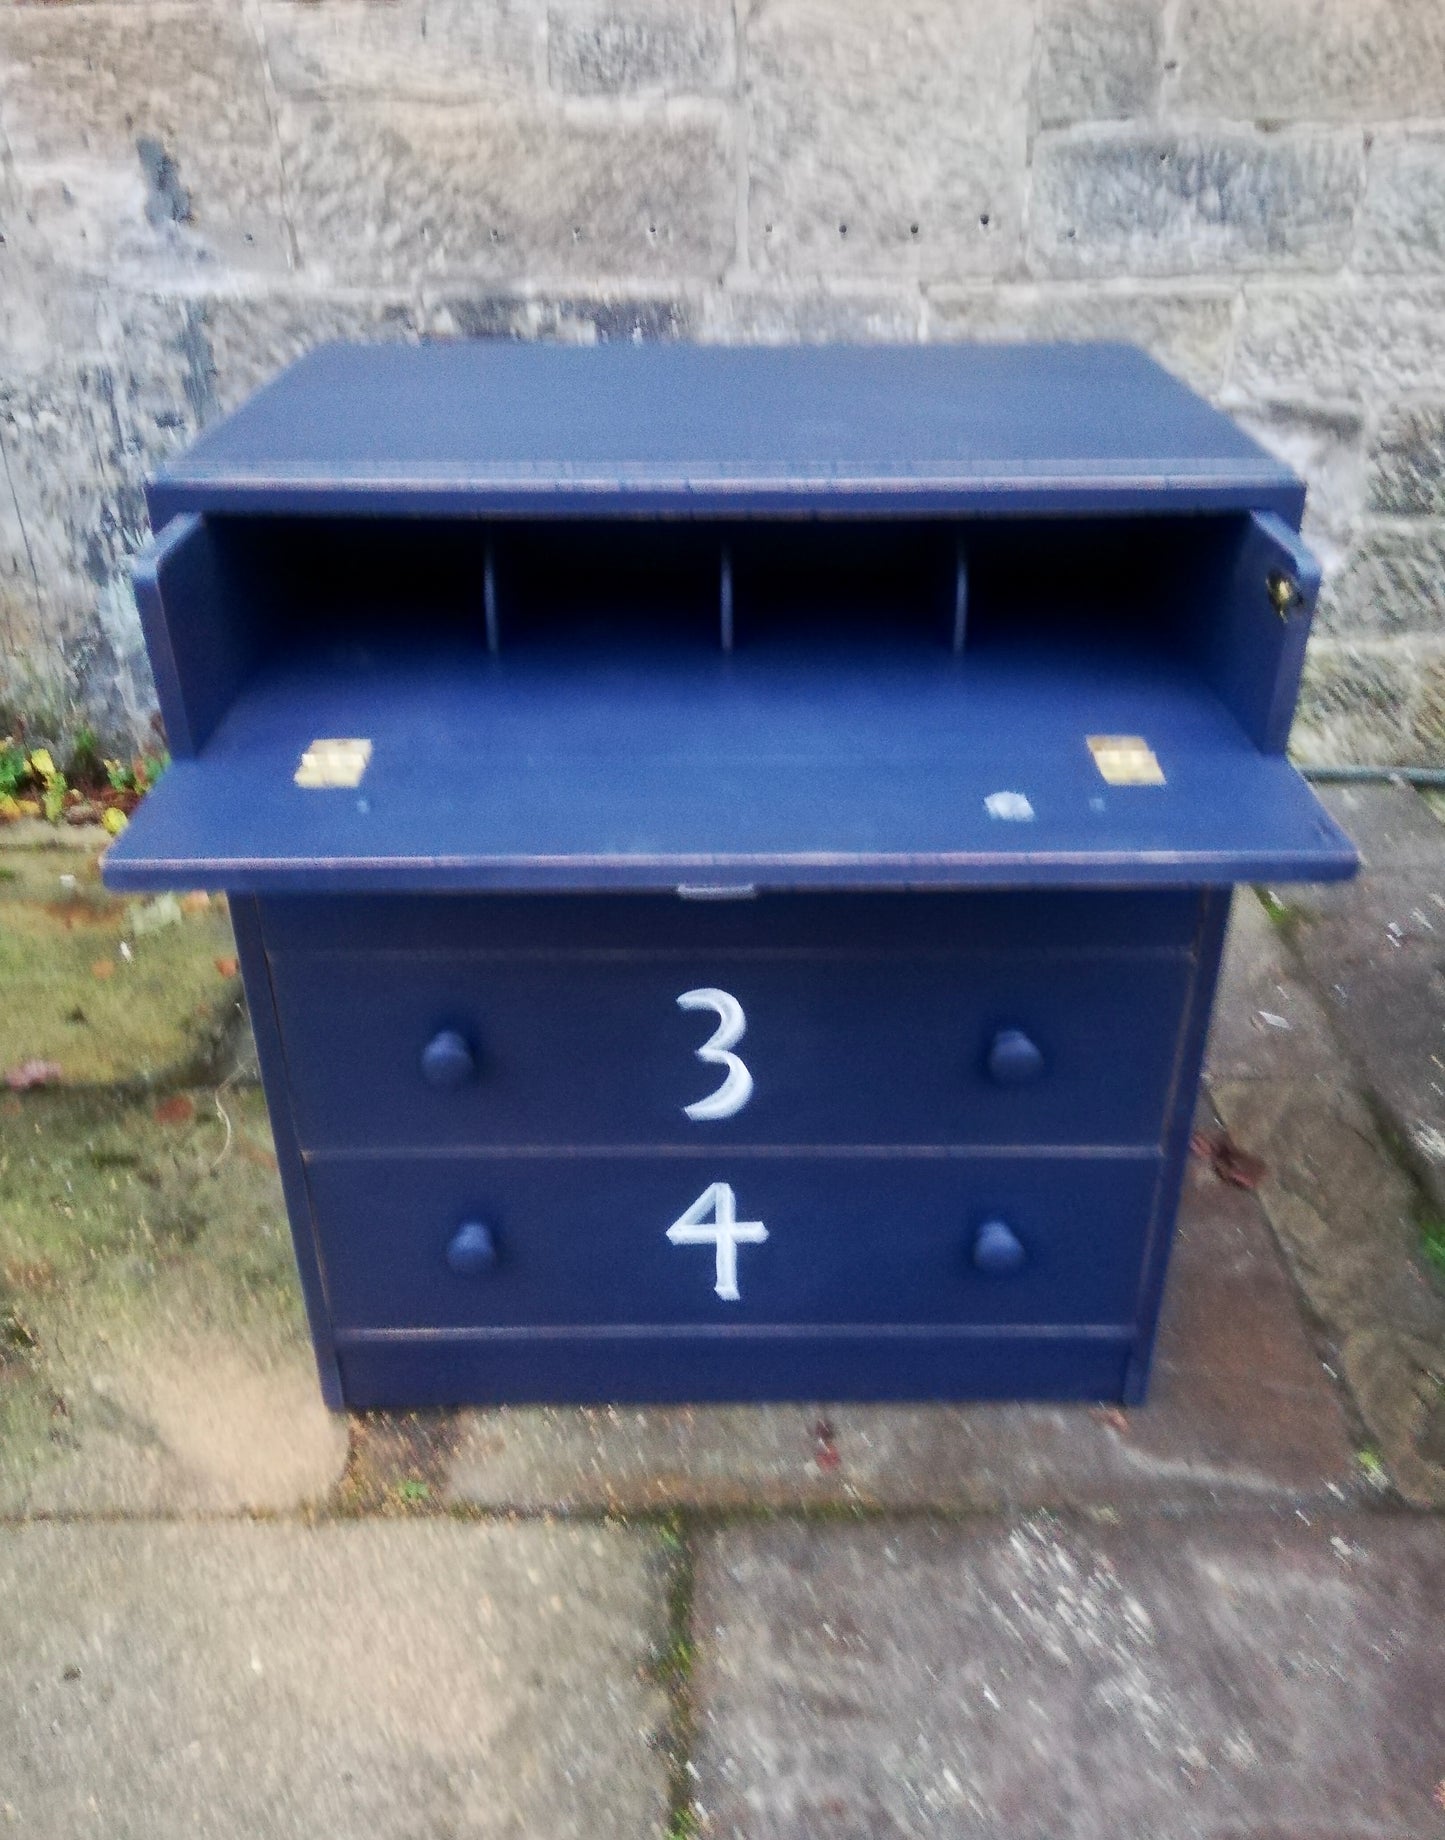 Vintage chest of drawers painted in navy